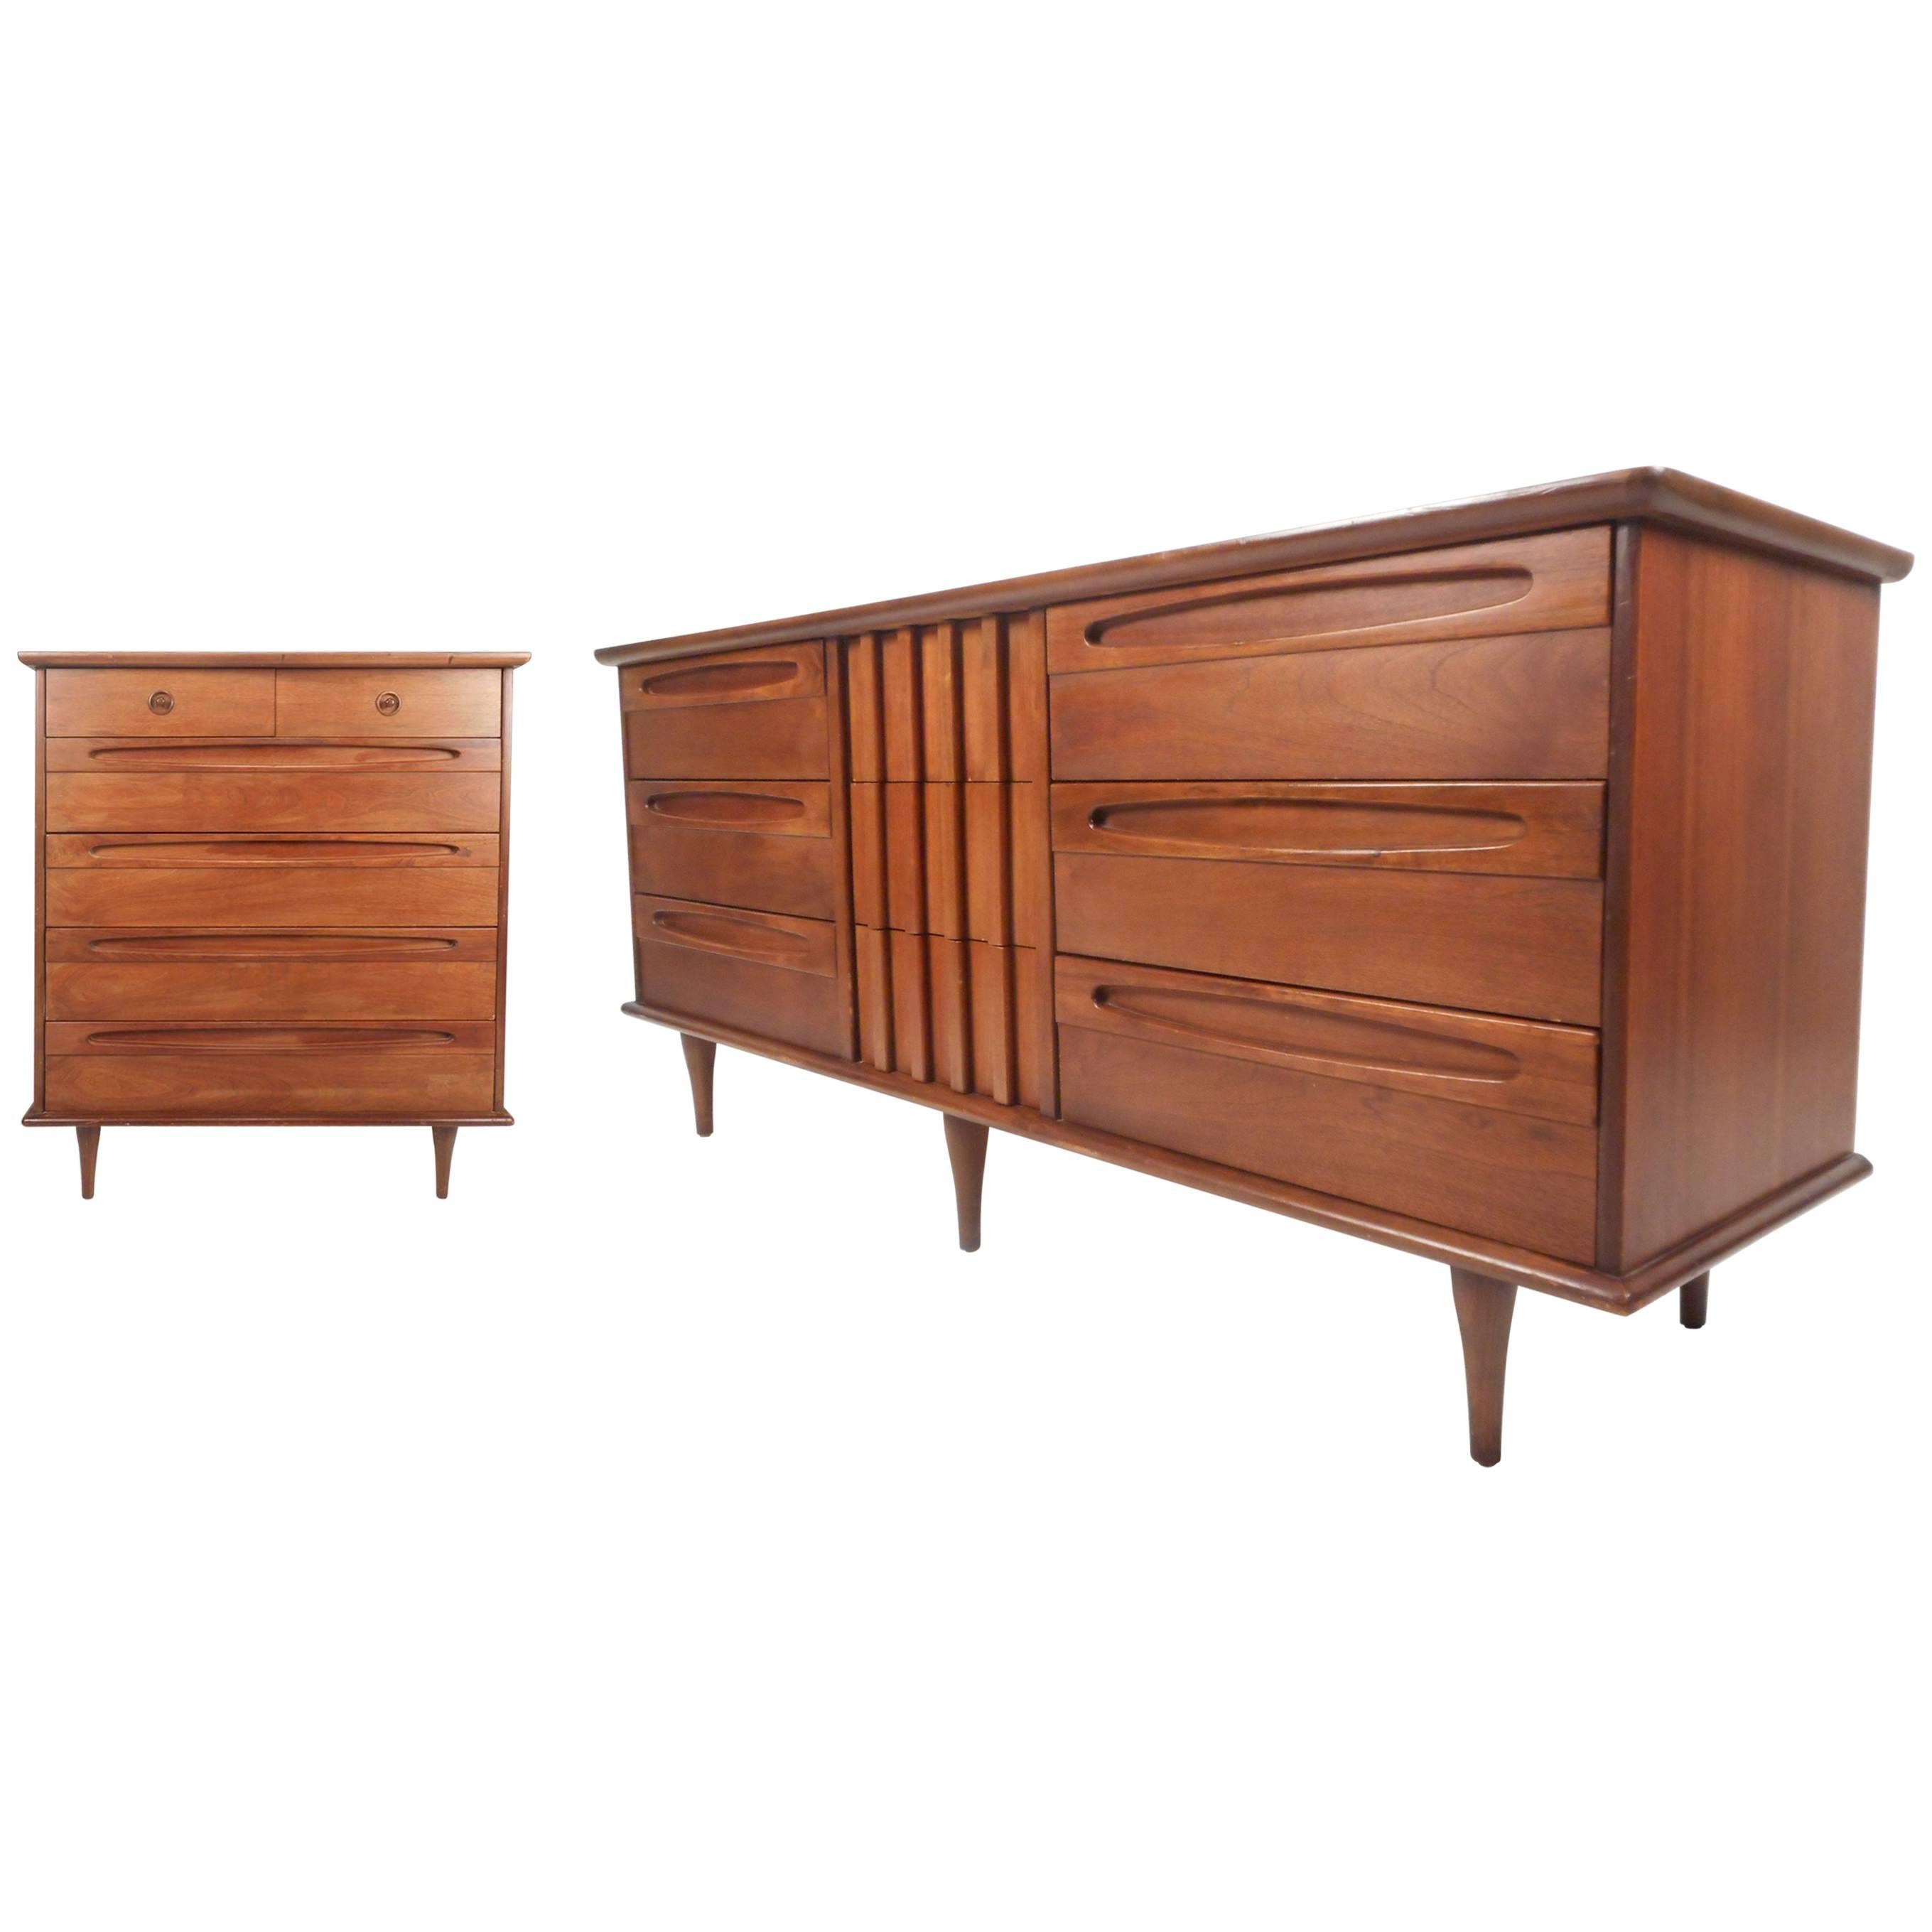 Unique Mid-Century Modern Bedroom Set by American of Martinsville